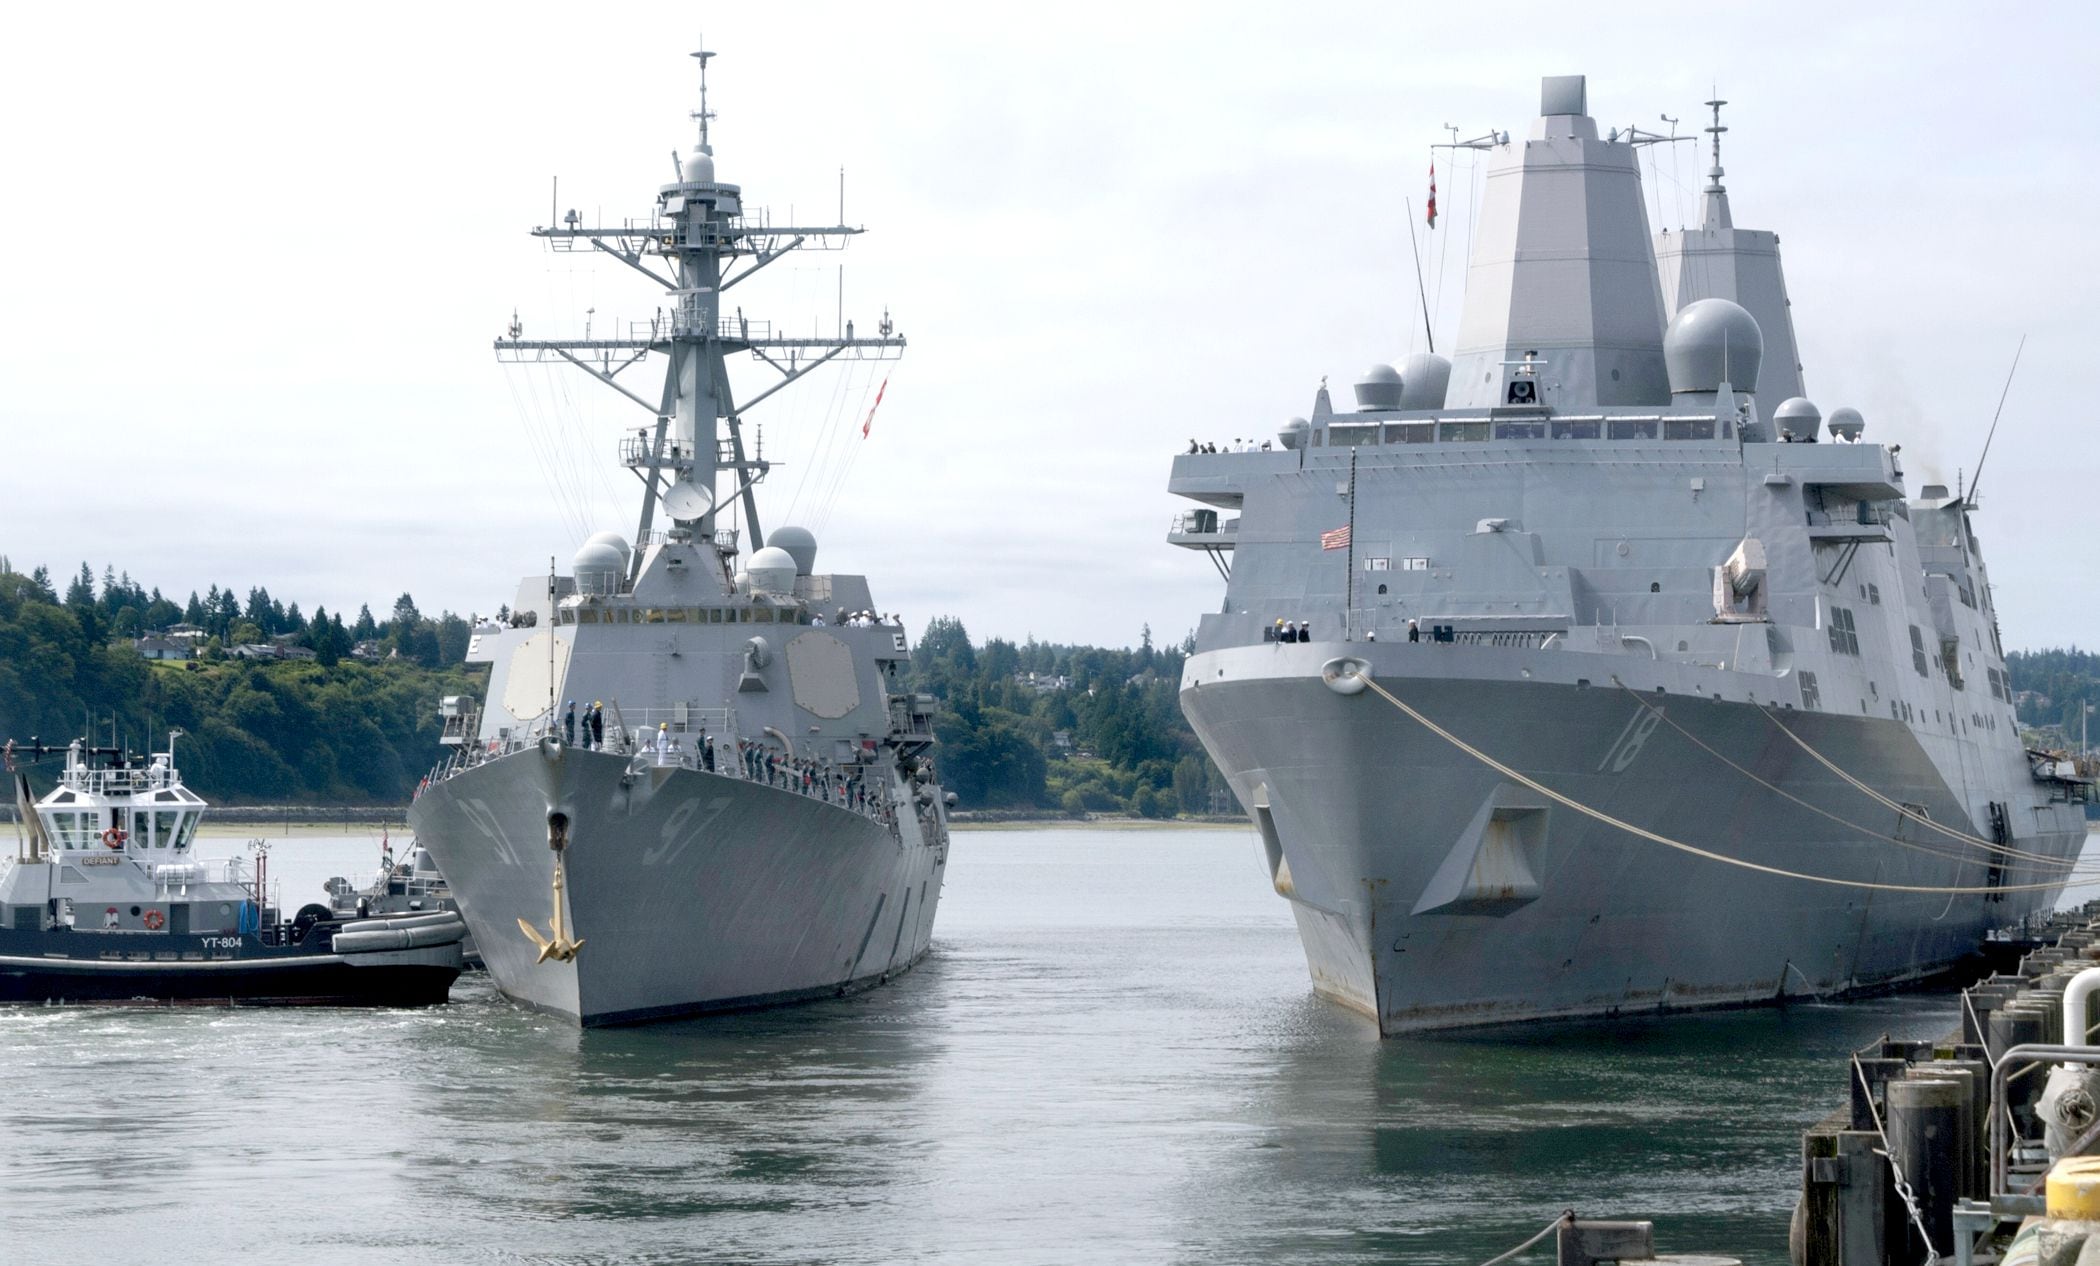 U.S. Navy Guided Missile Destroyers - Ingalls Shipbuilding